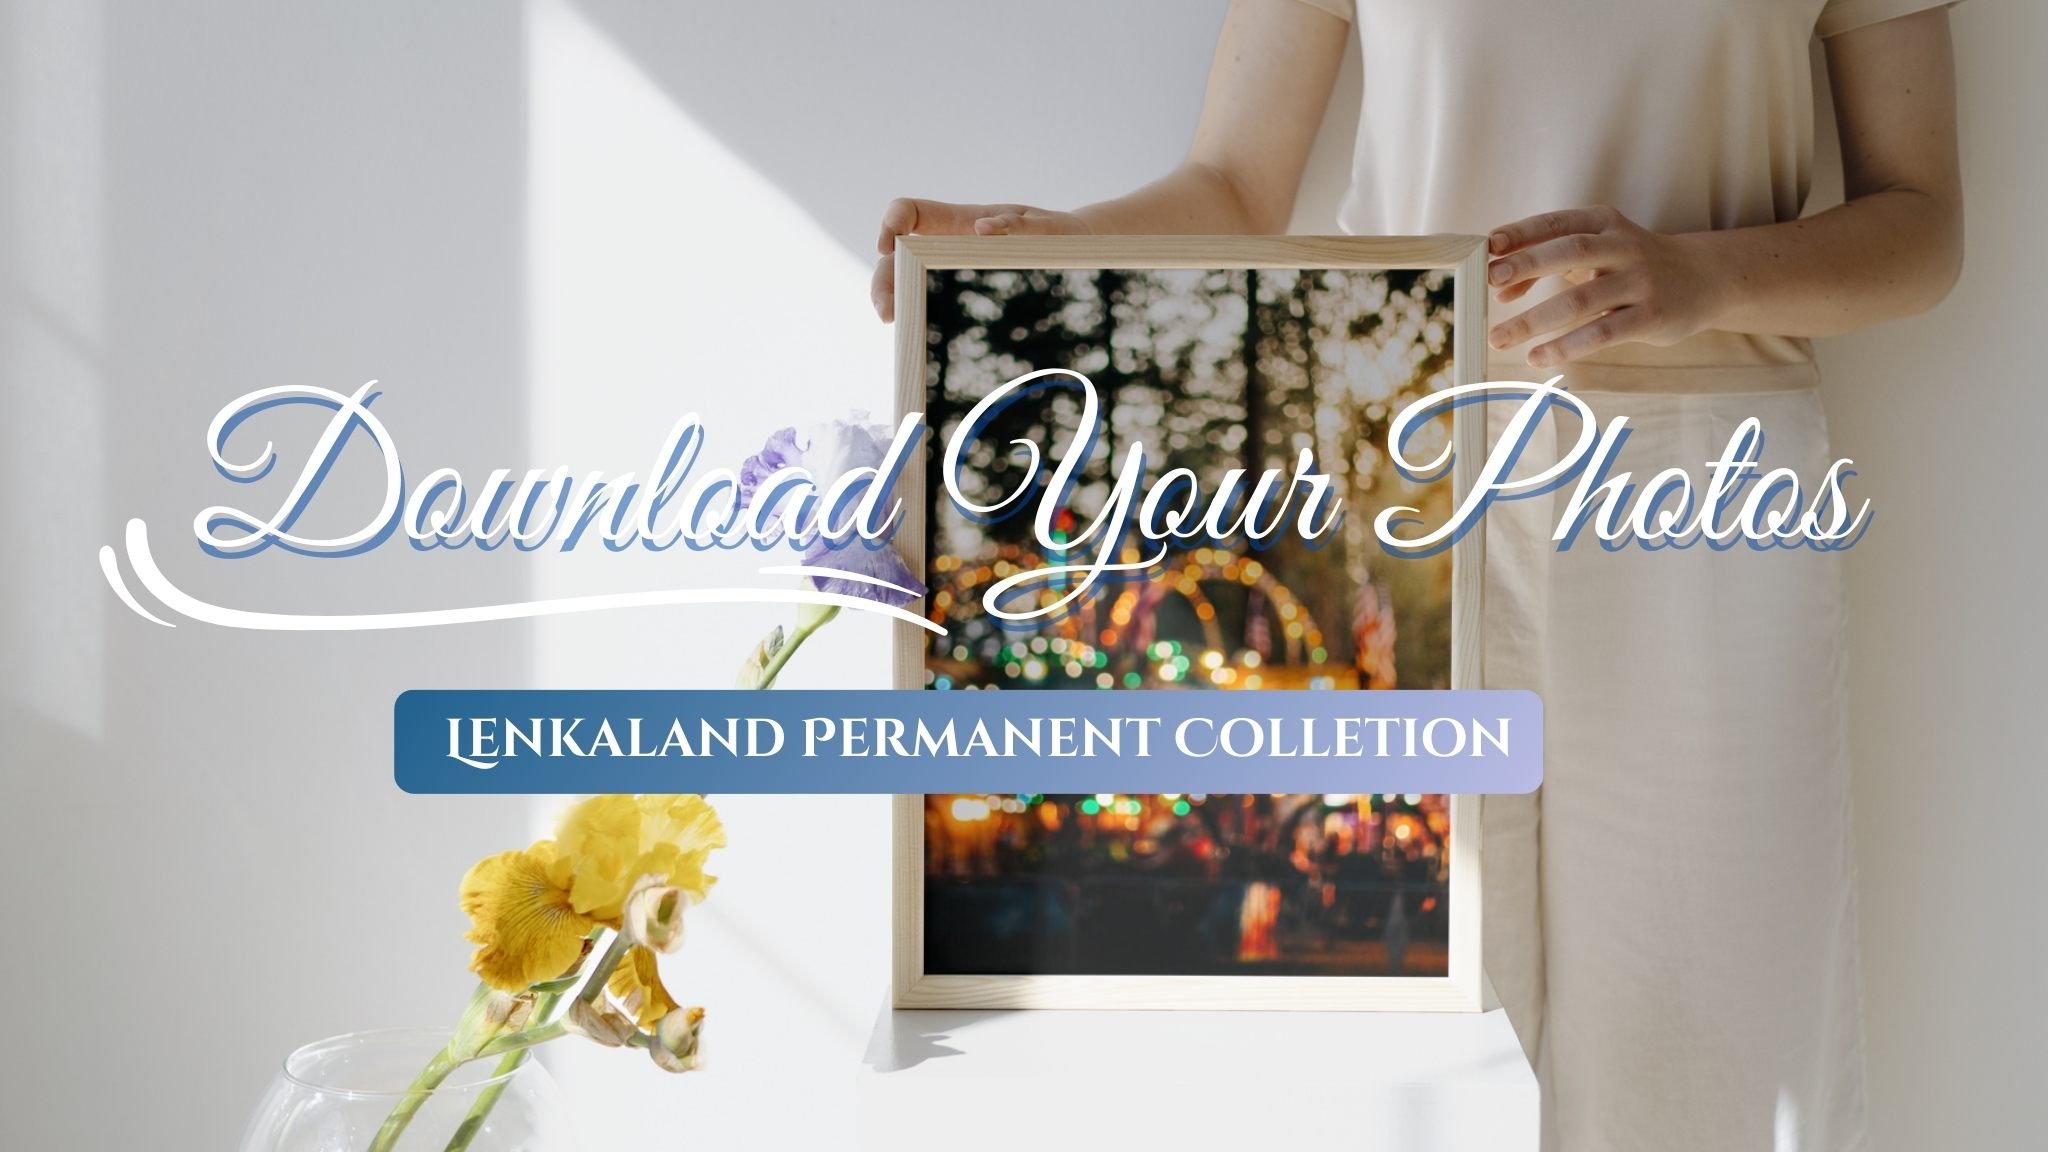 Download Images in the Lenkaland Permanent Collection